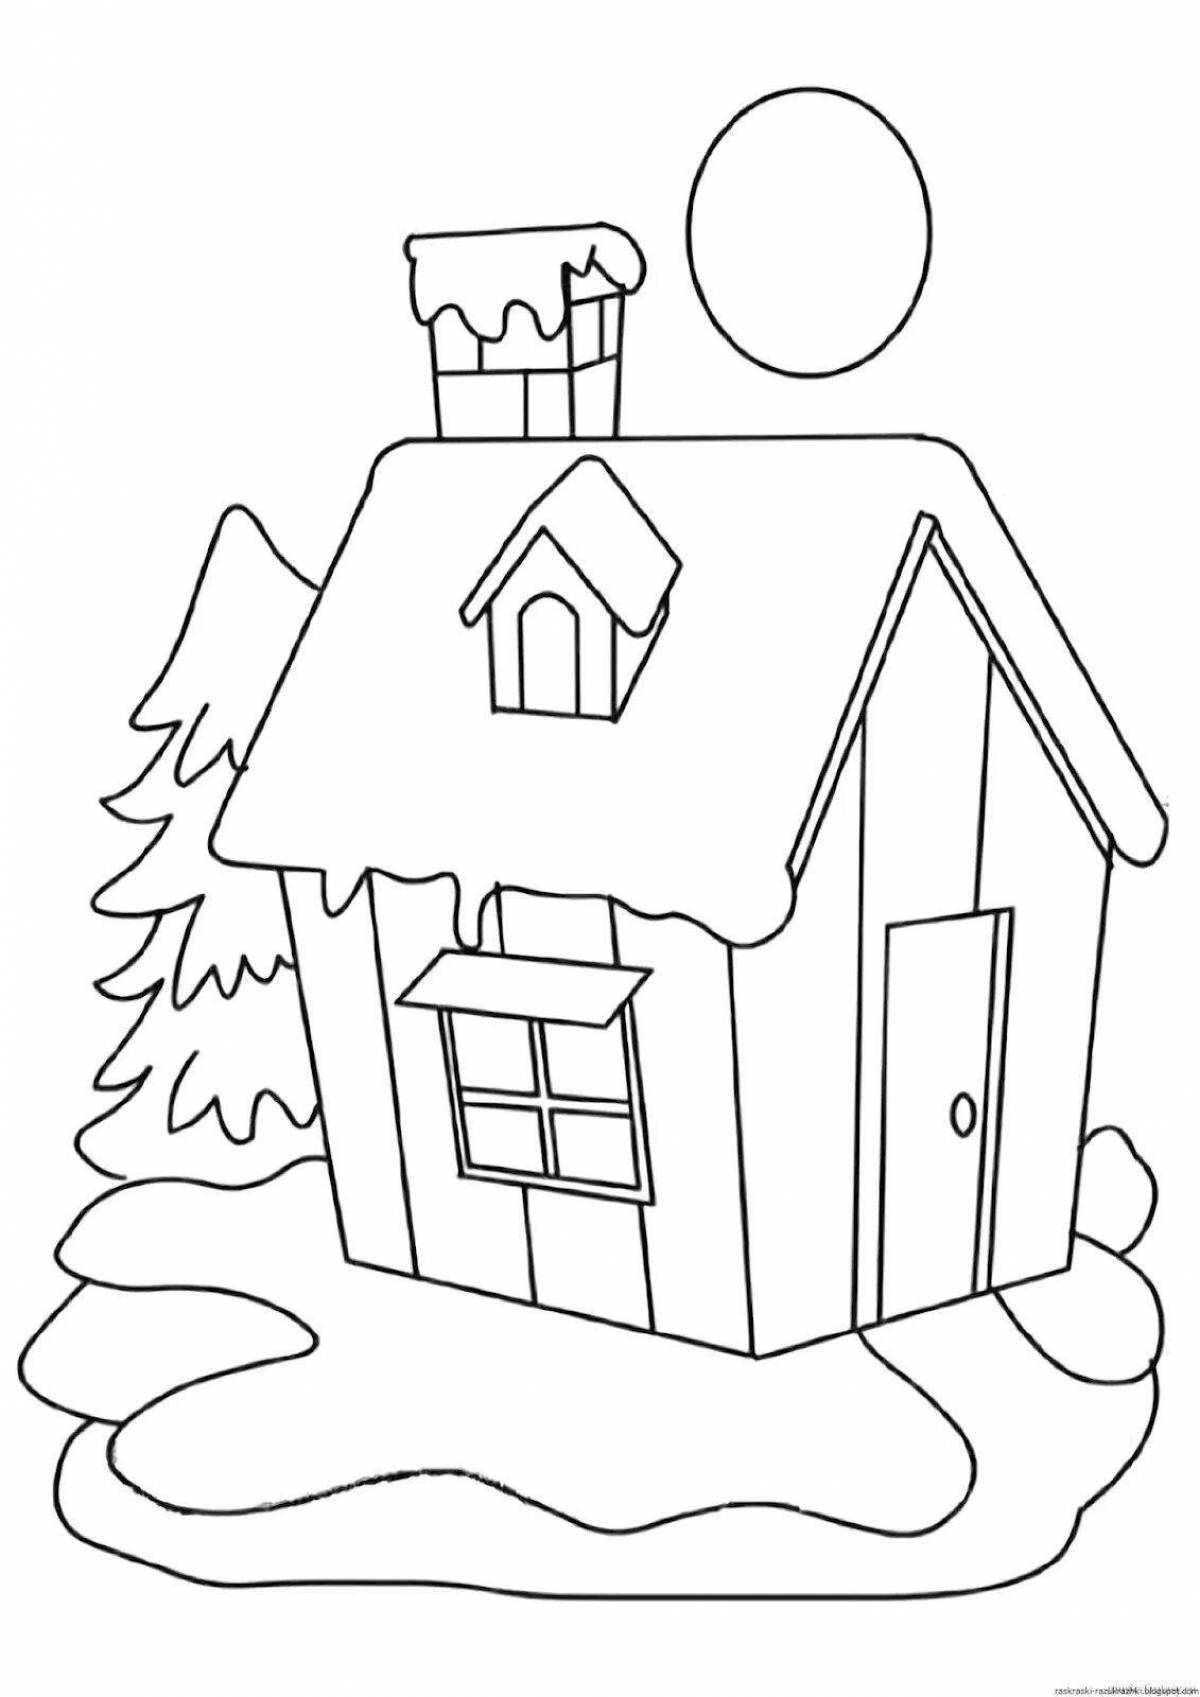 Shining winter house coloring pages for kids